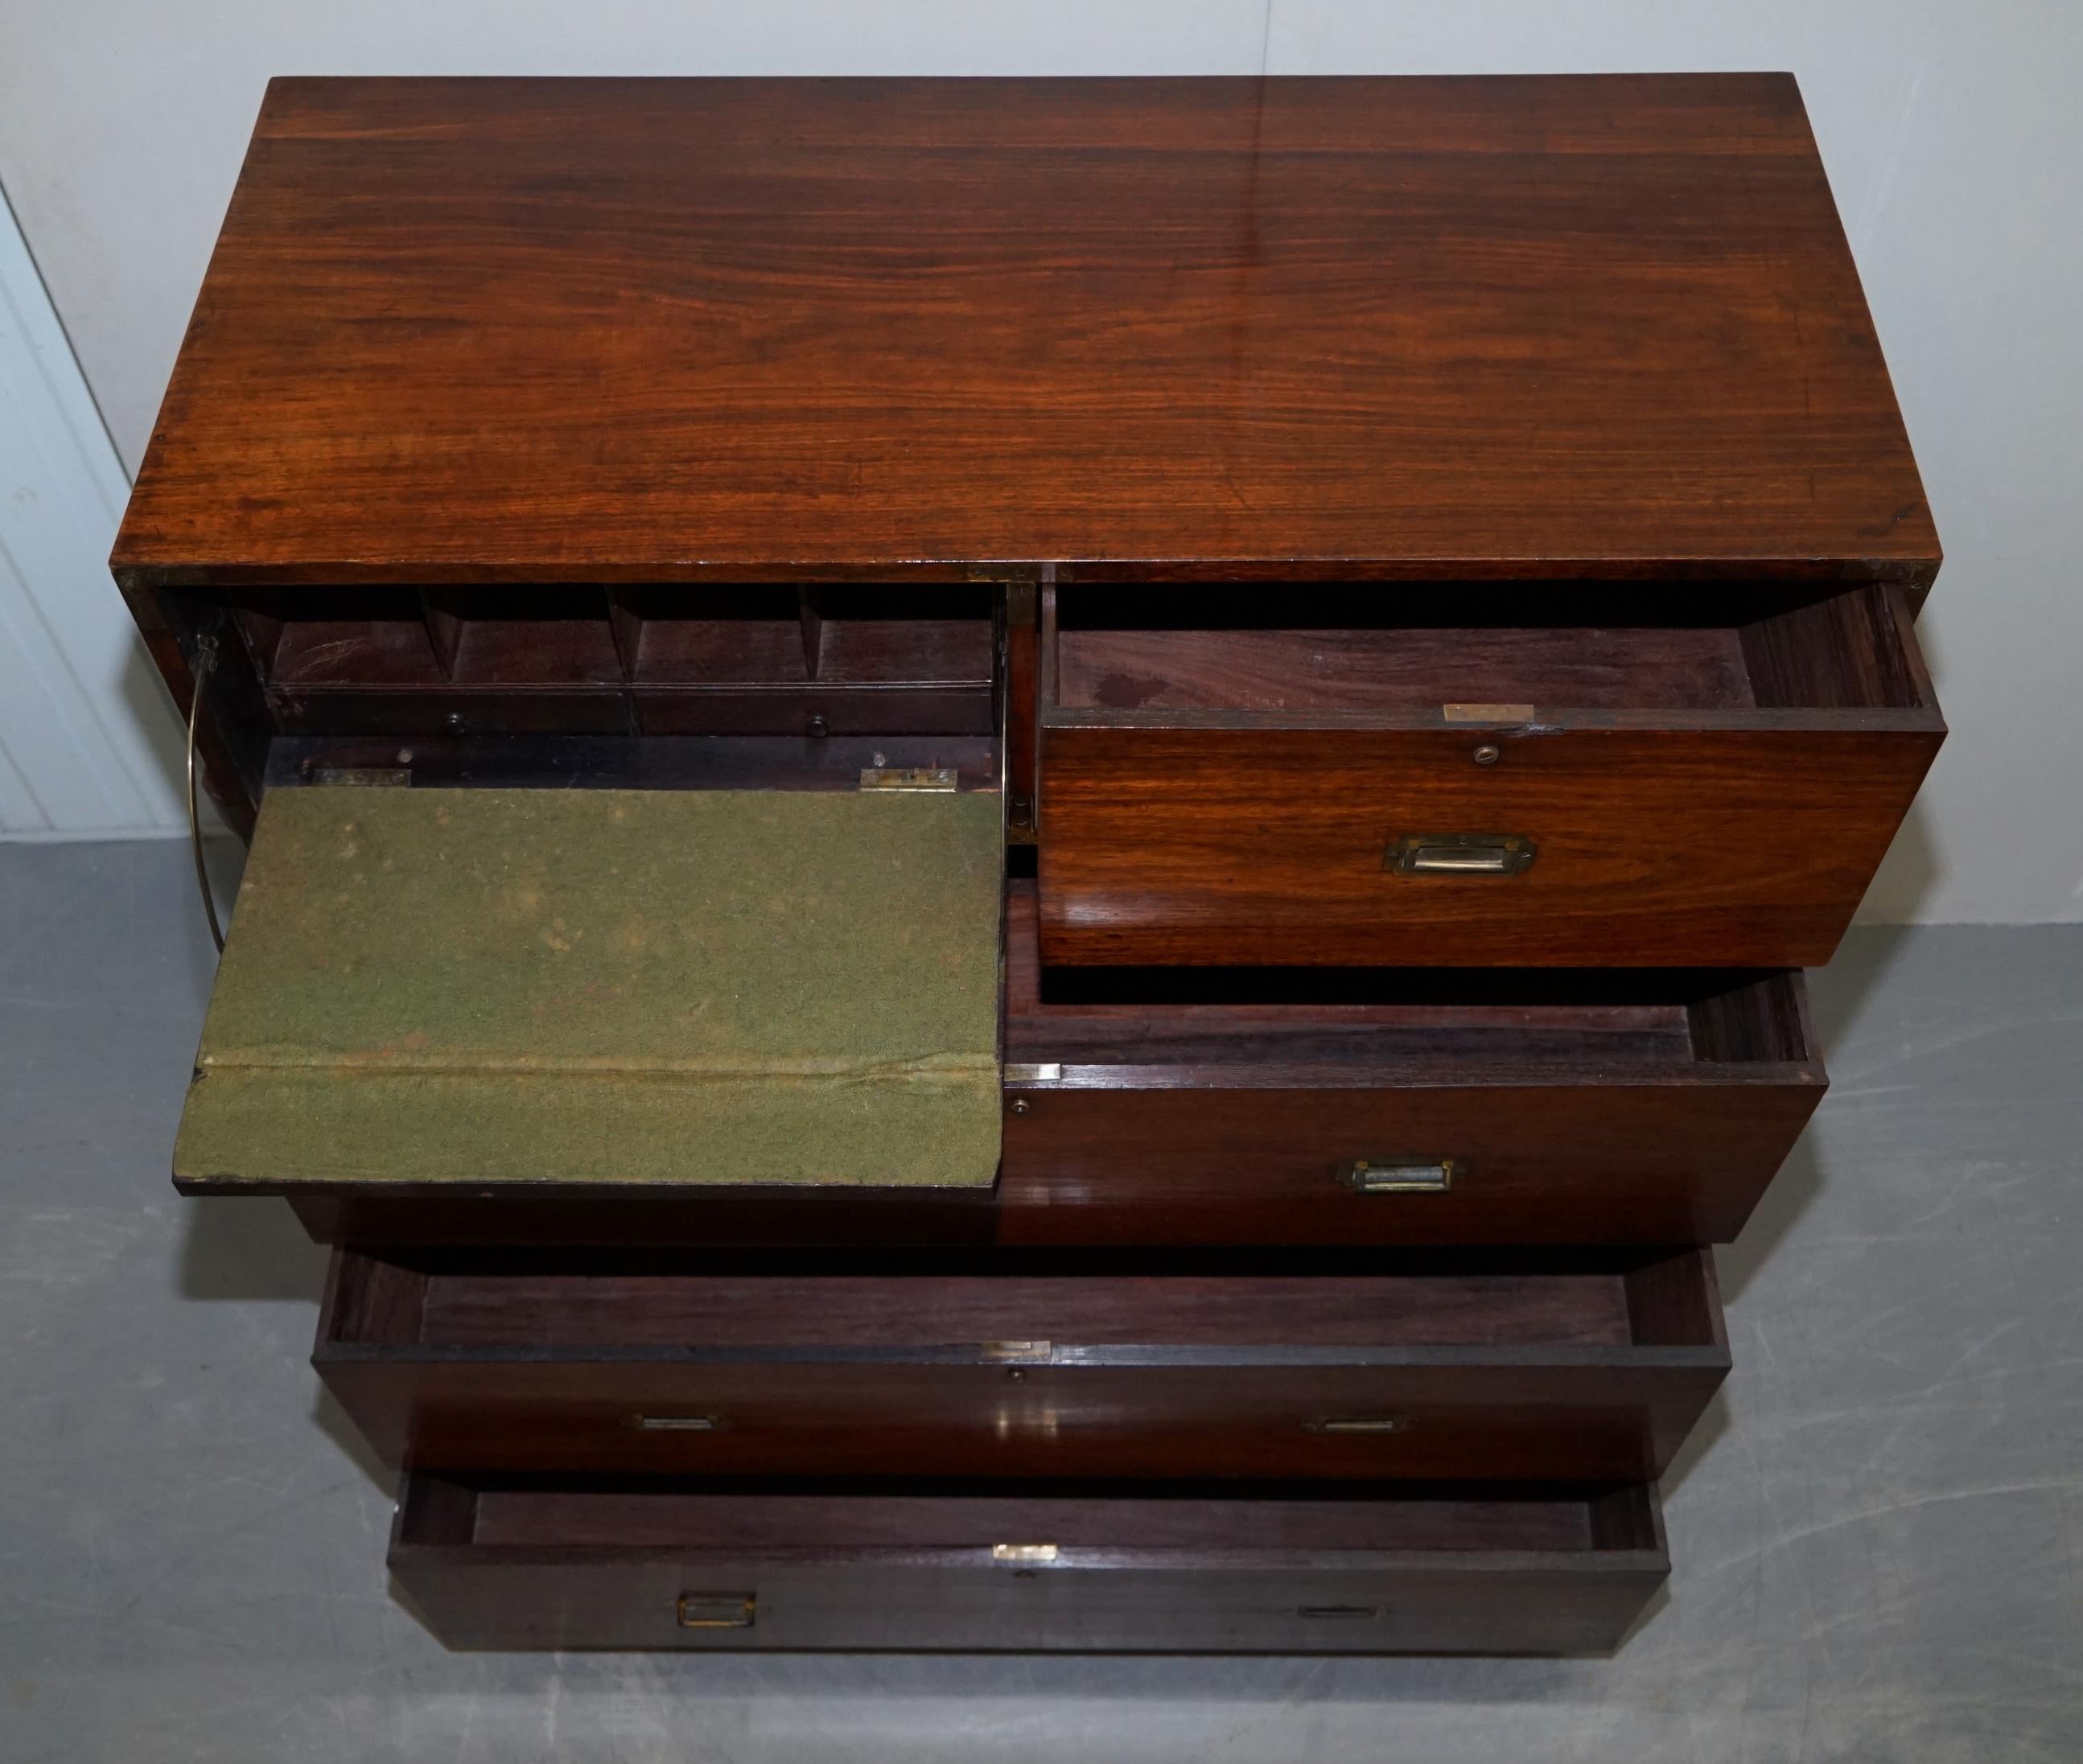 Restored 1876 Stamped Camphor Wood Military Campaign Chest of Drawers with Desk 9